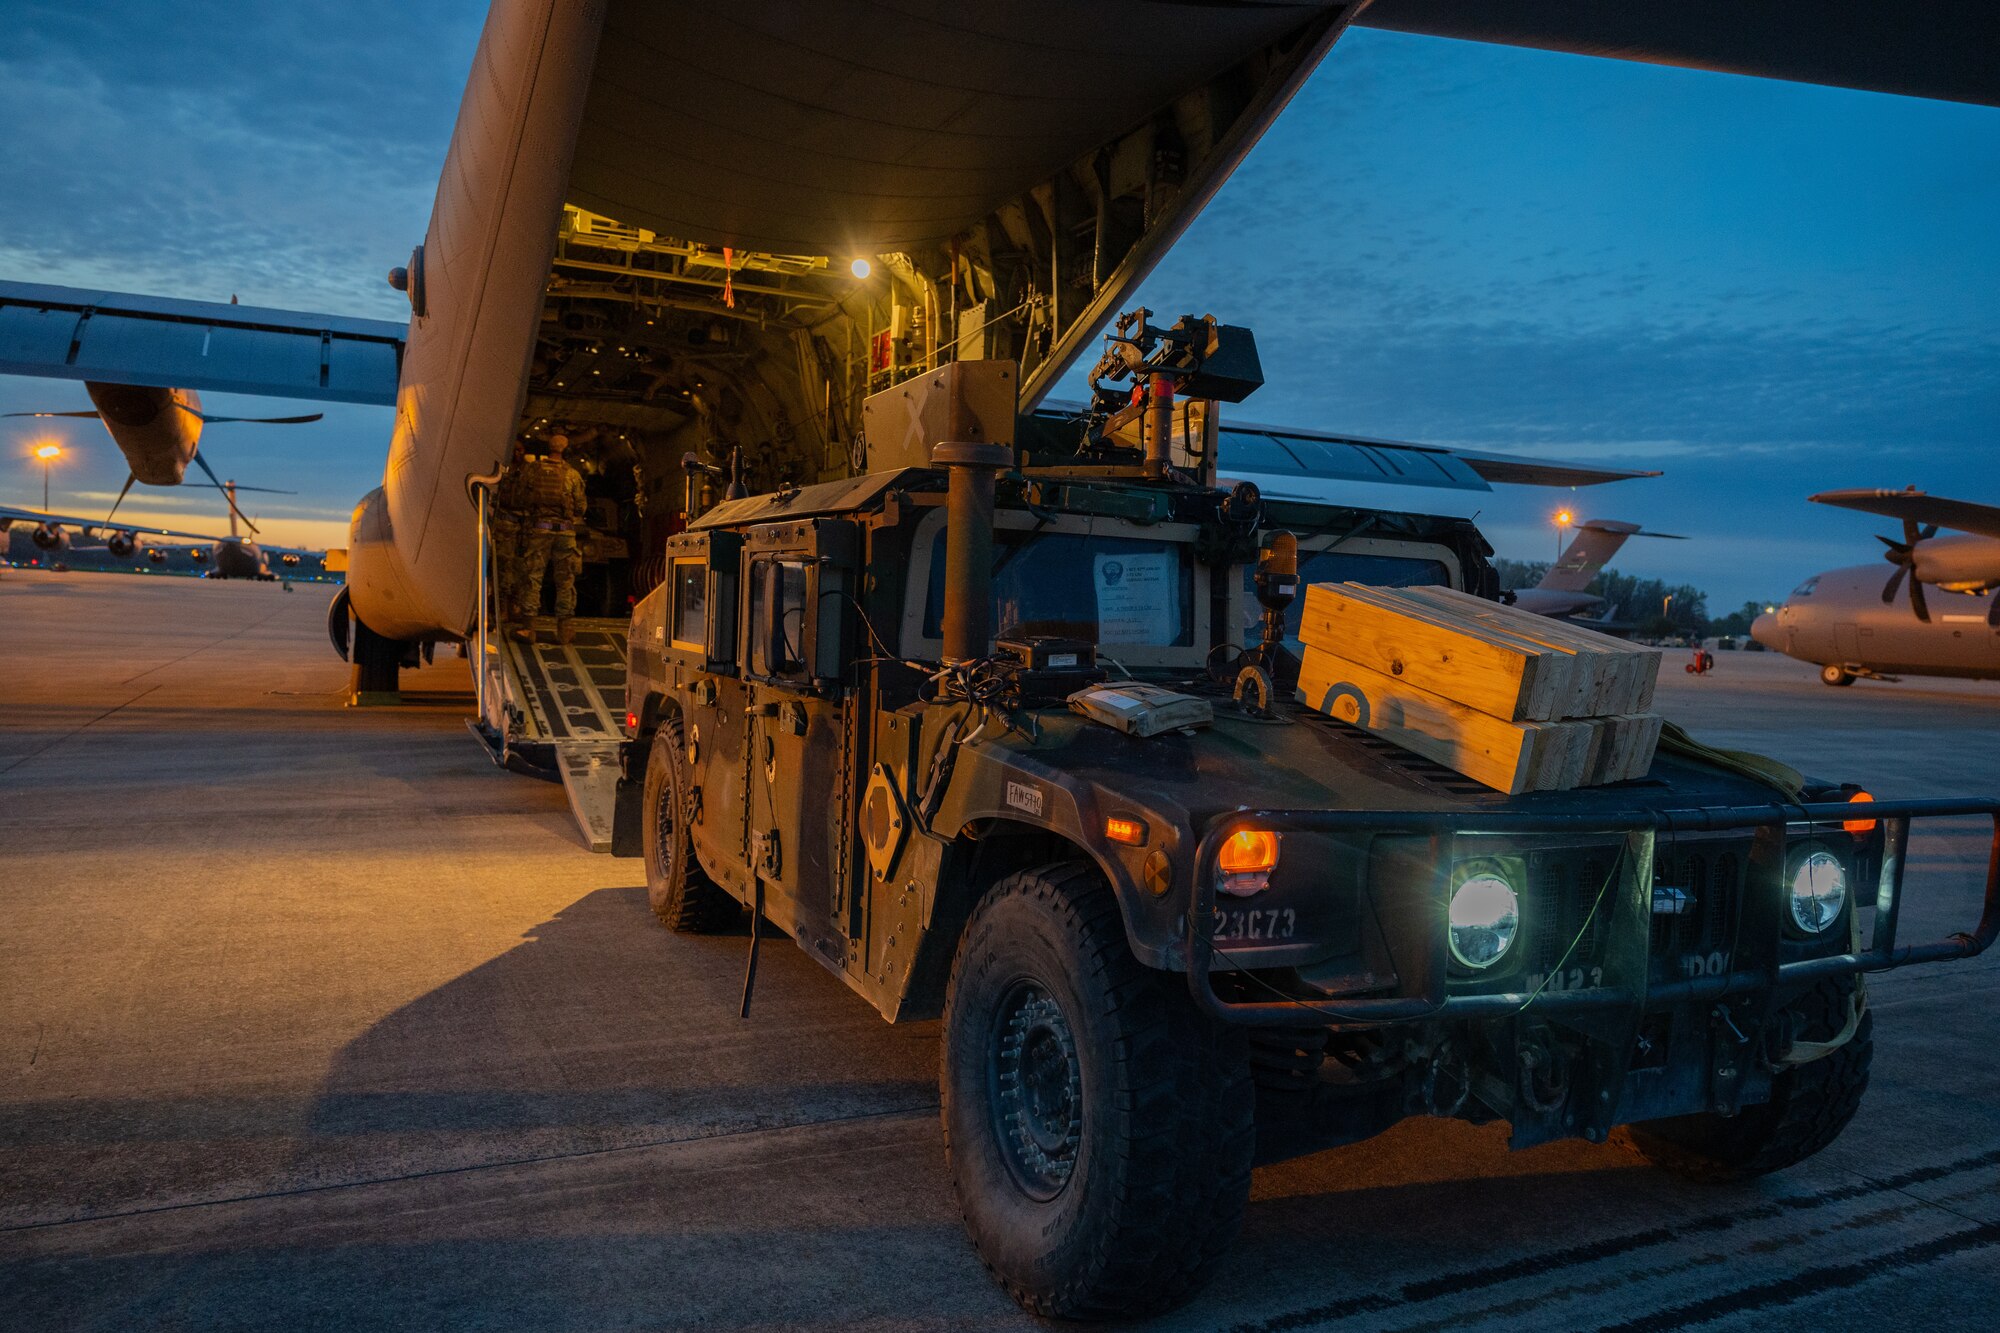 Airmen load a truck into the back of a C-130J at night